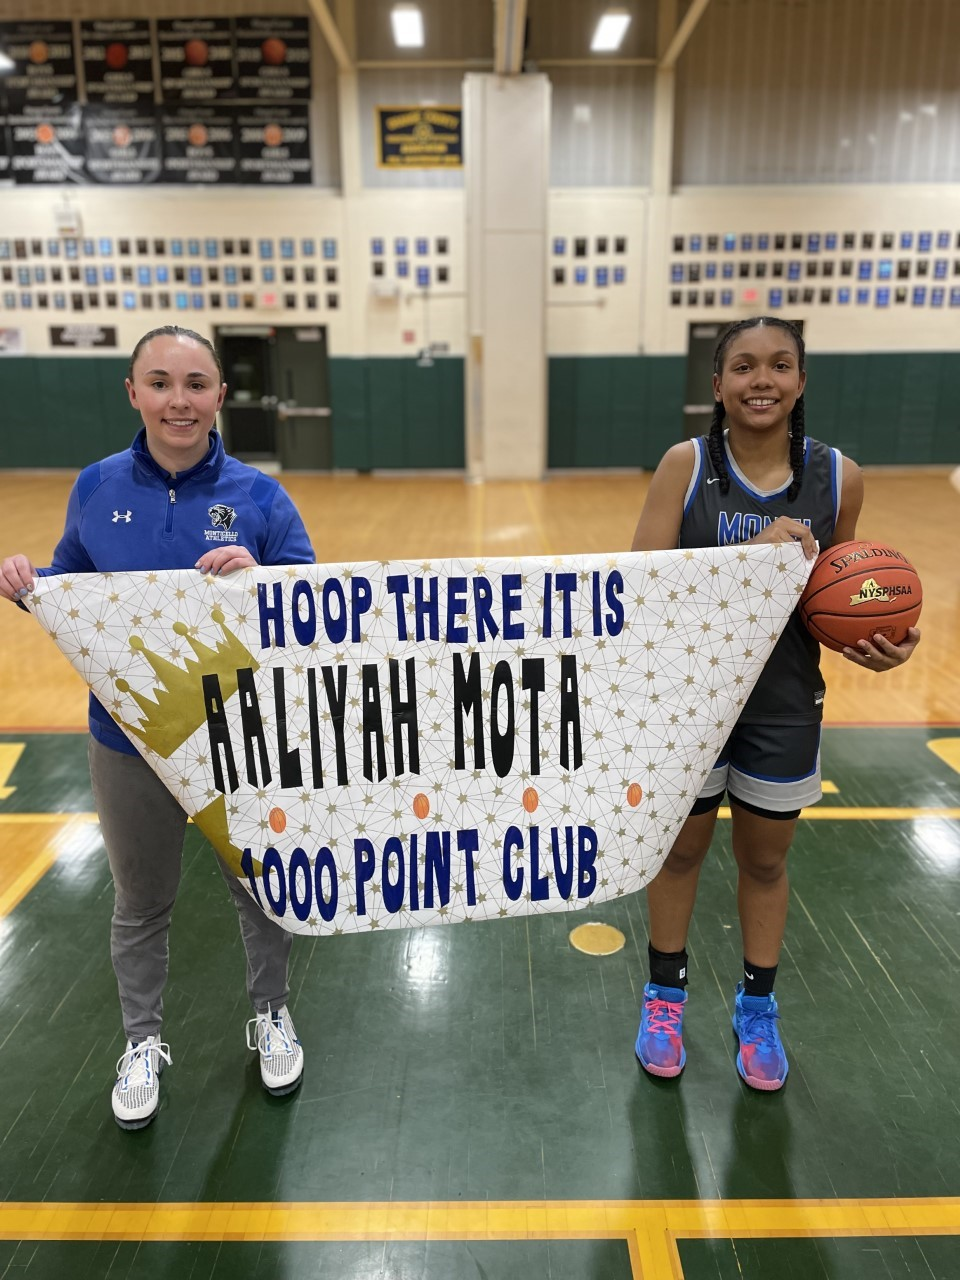 Aaliyah Mota poses with a banner displaying her name 